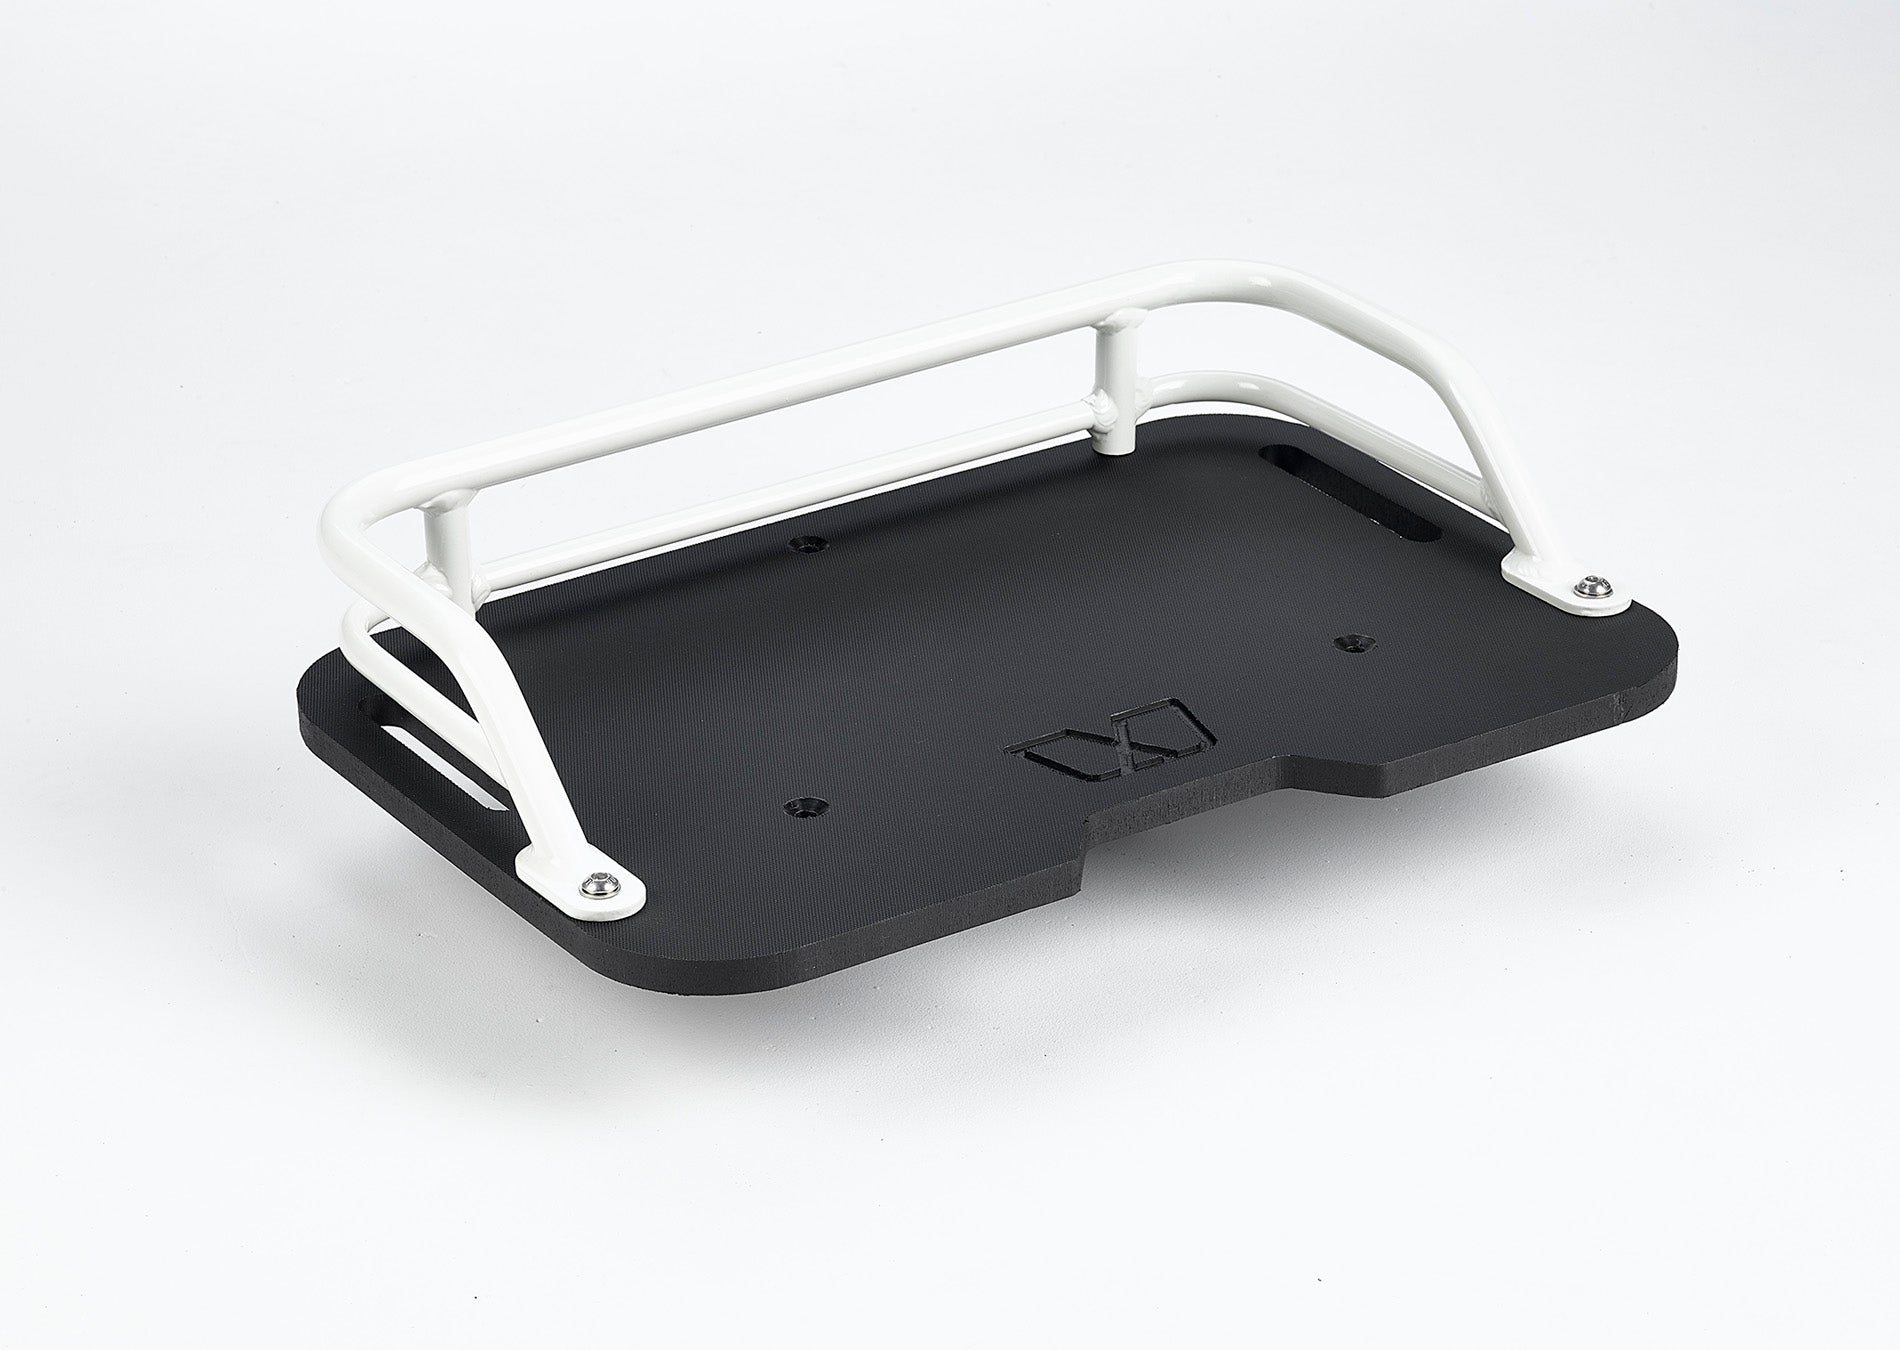 Front cargo deck for Ubco 2x2 has dual white aluminum rails that match Ubco 2x2 bike and a solid black durable HDPE deck with subtle embossed Ubco logo